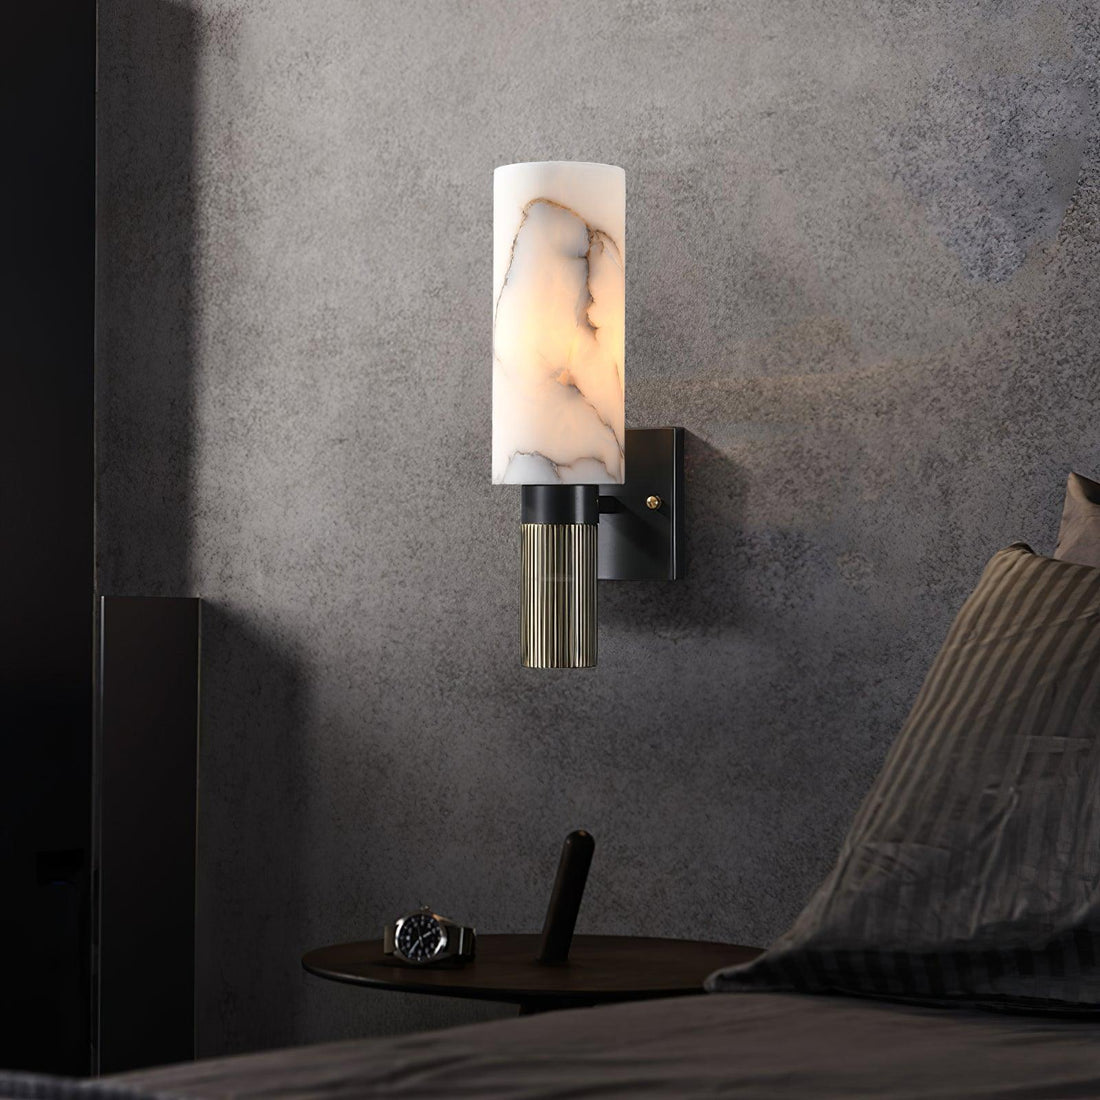 Torch Marble Walll Sconce